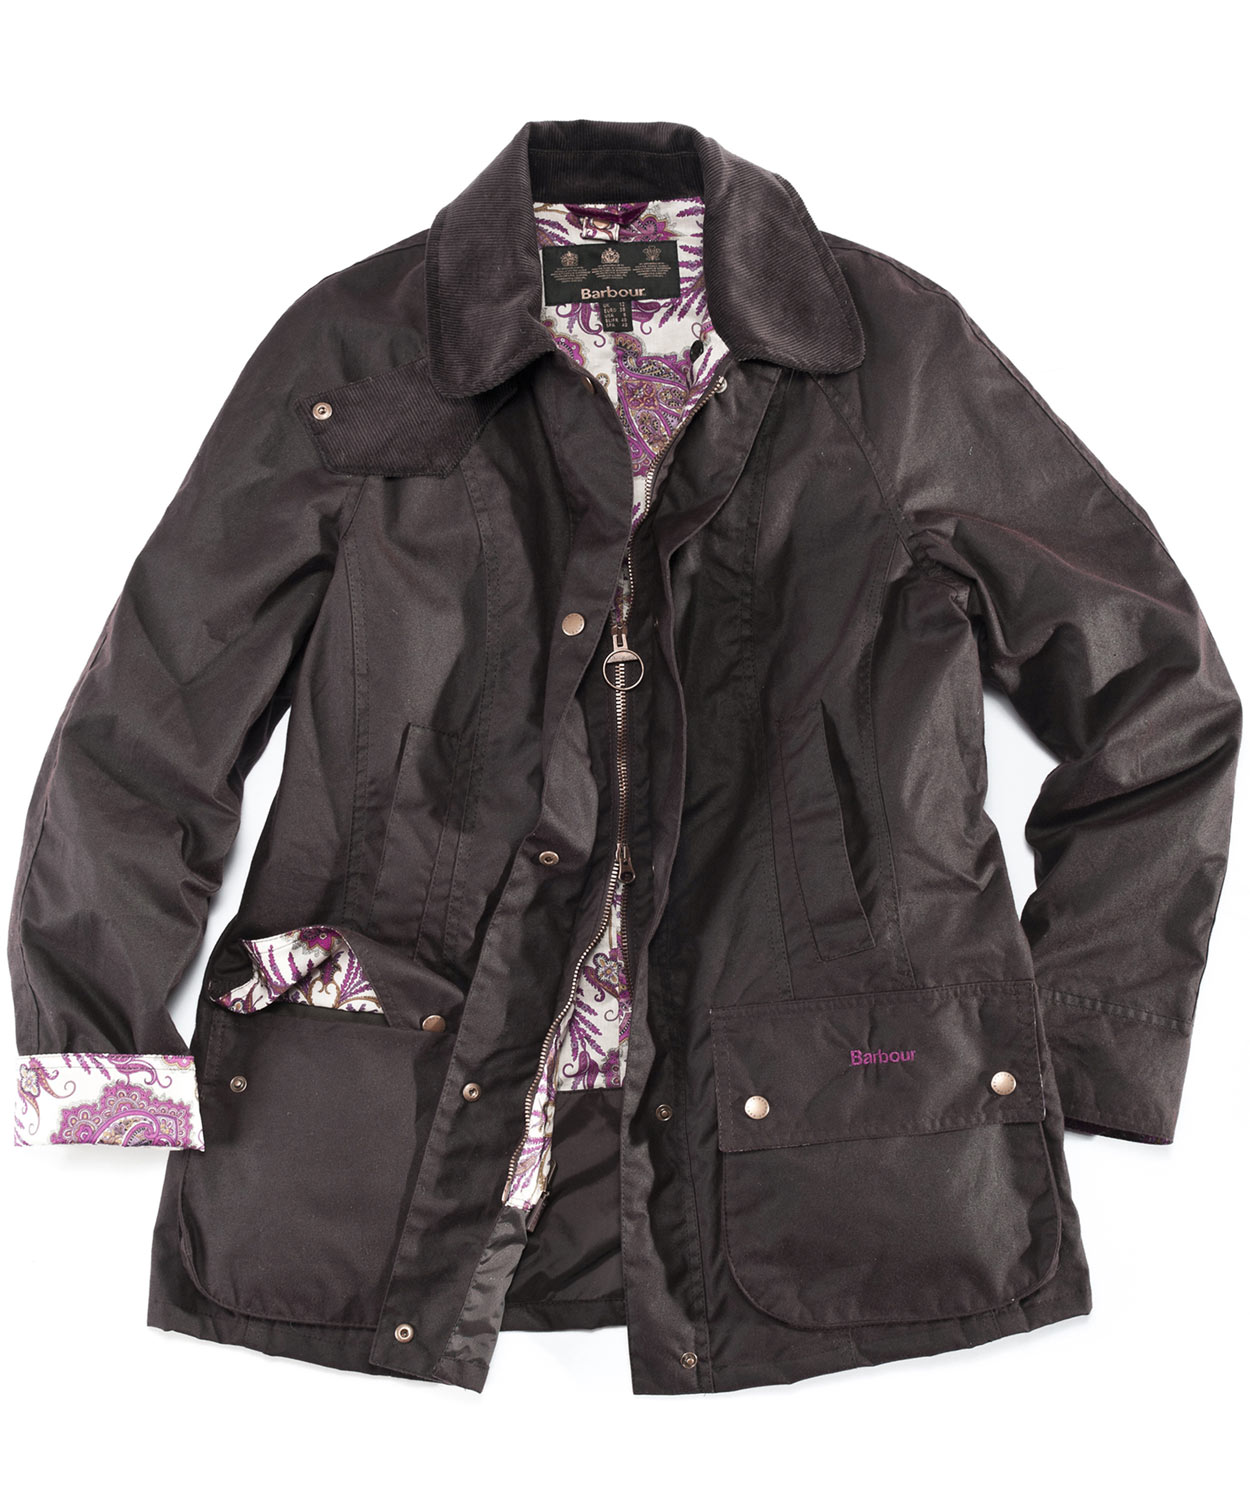 Lyst - Barbour Lord Paisley Liberty Print Beadnell Jacket in Brown